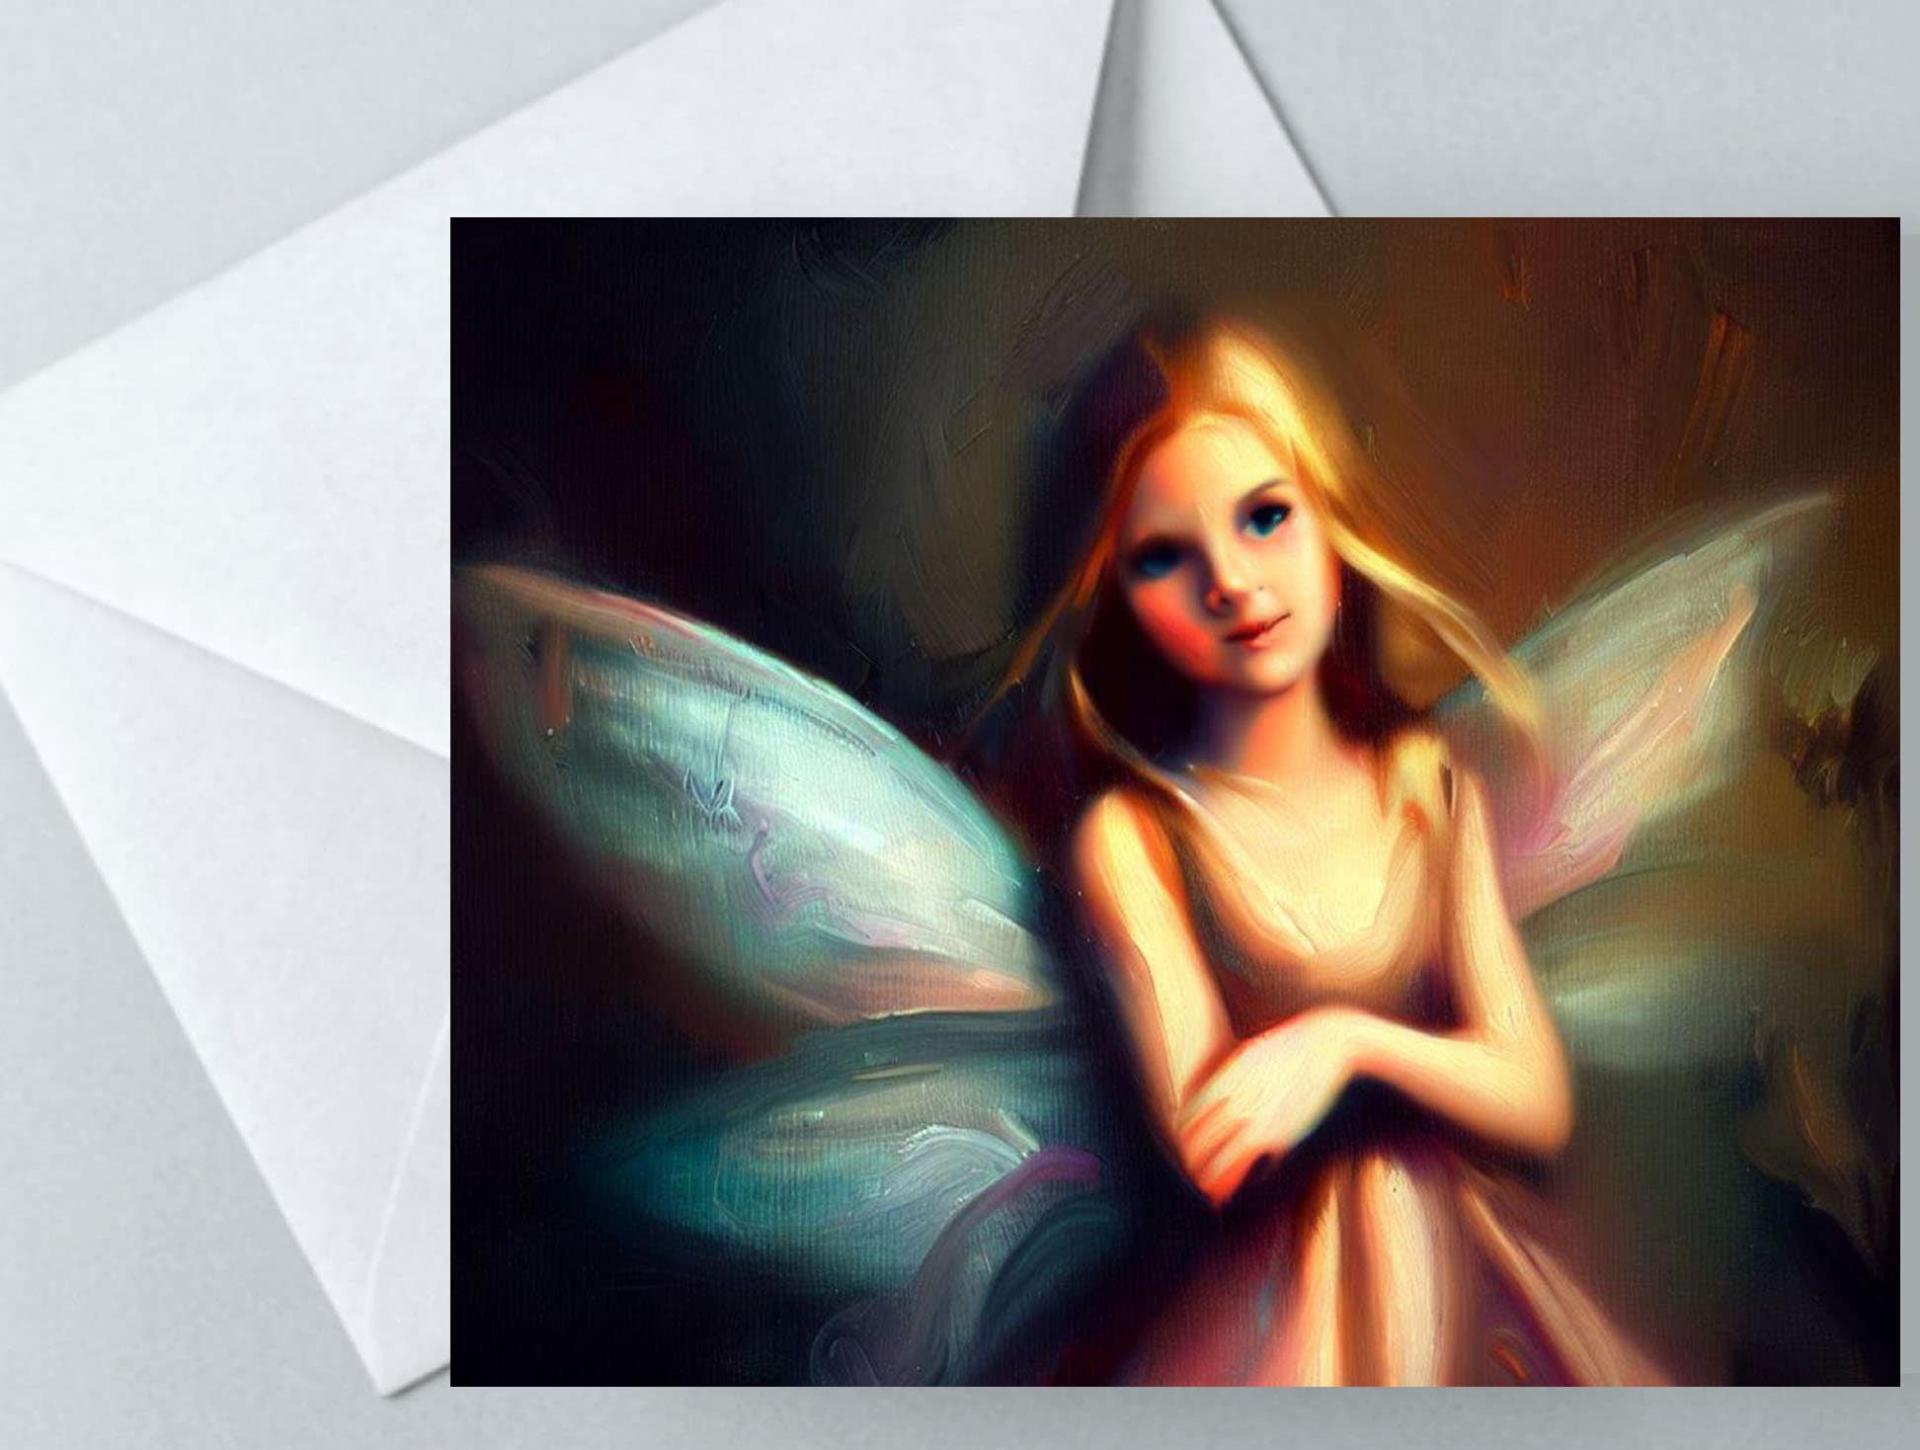 Fairy Greeting Cards, Set of 2 Designs, Bulk Pack of Cards